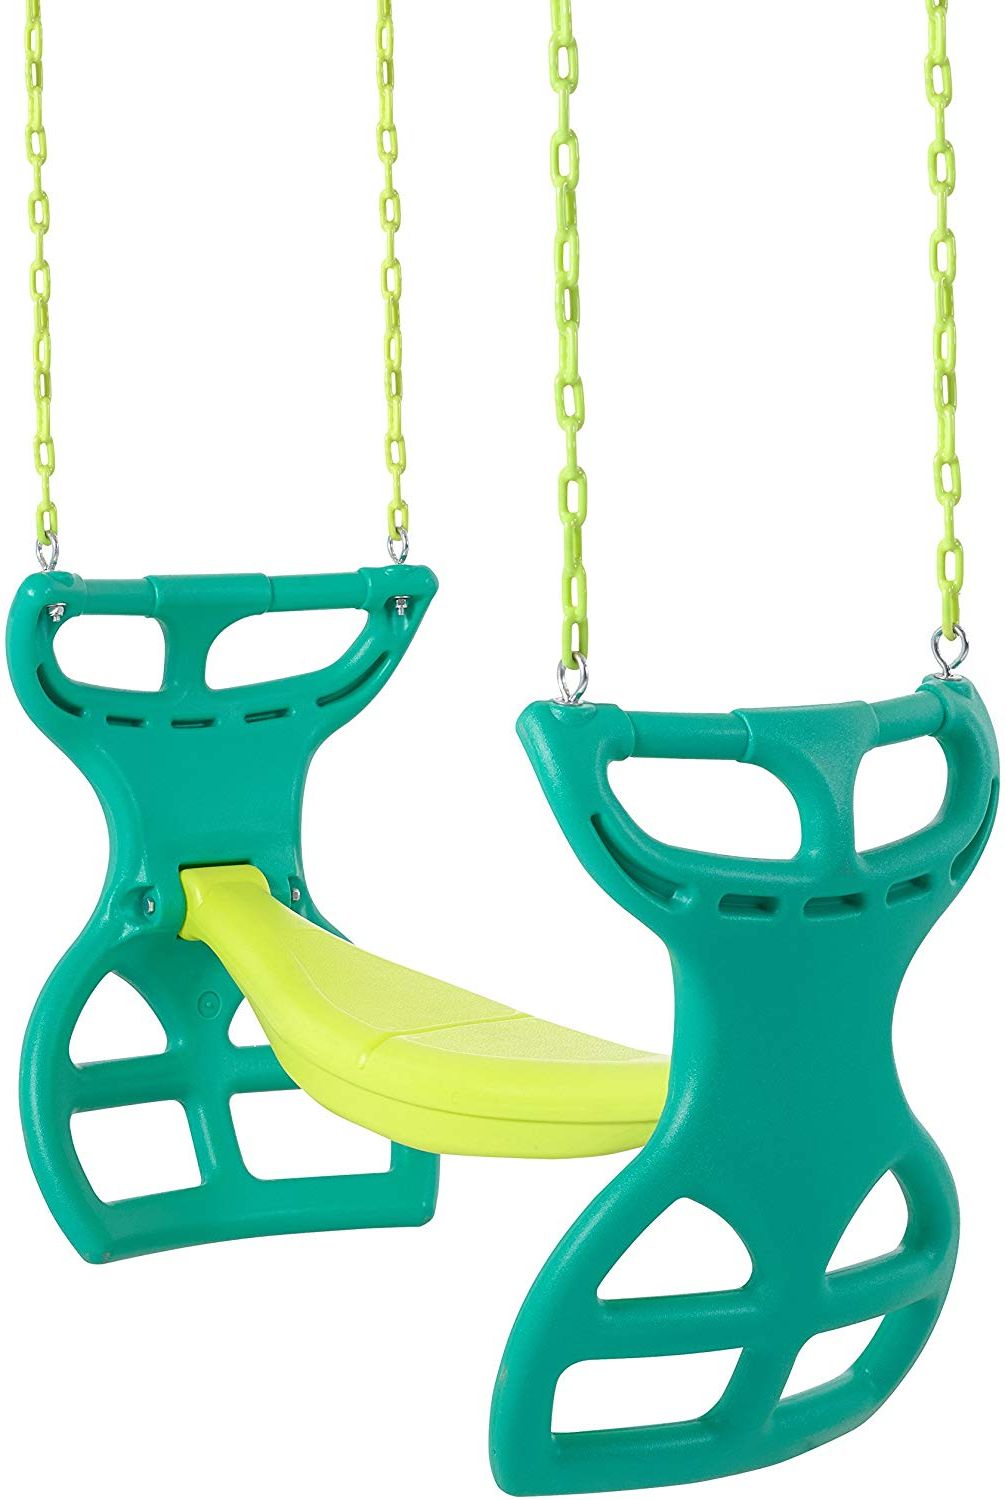 Dual Rider Glider Swings With Soft Touch Rope Intended For Well Liked Swingan – Two Seater Glider Swing – Vinyl Coated Chain – Hardware For  Intallation Included (View 4 of 30)